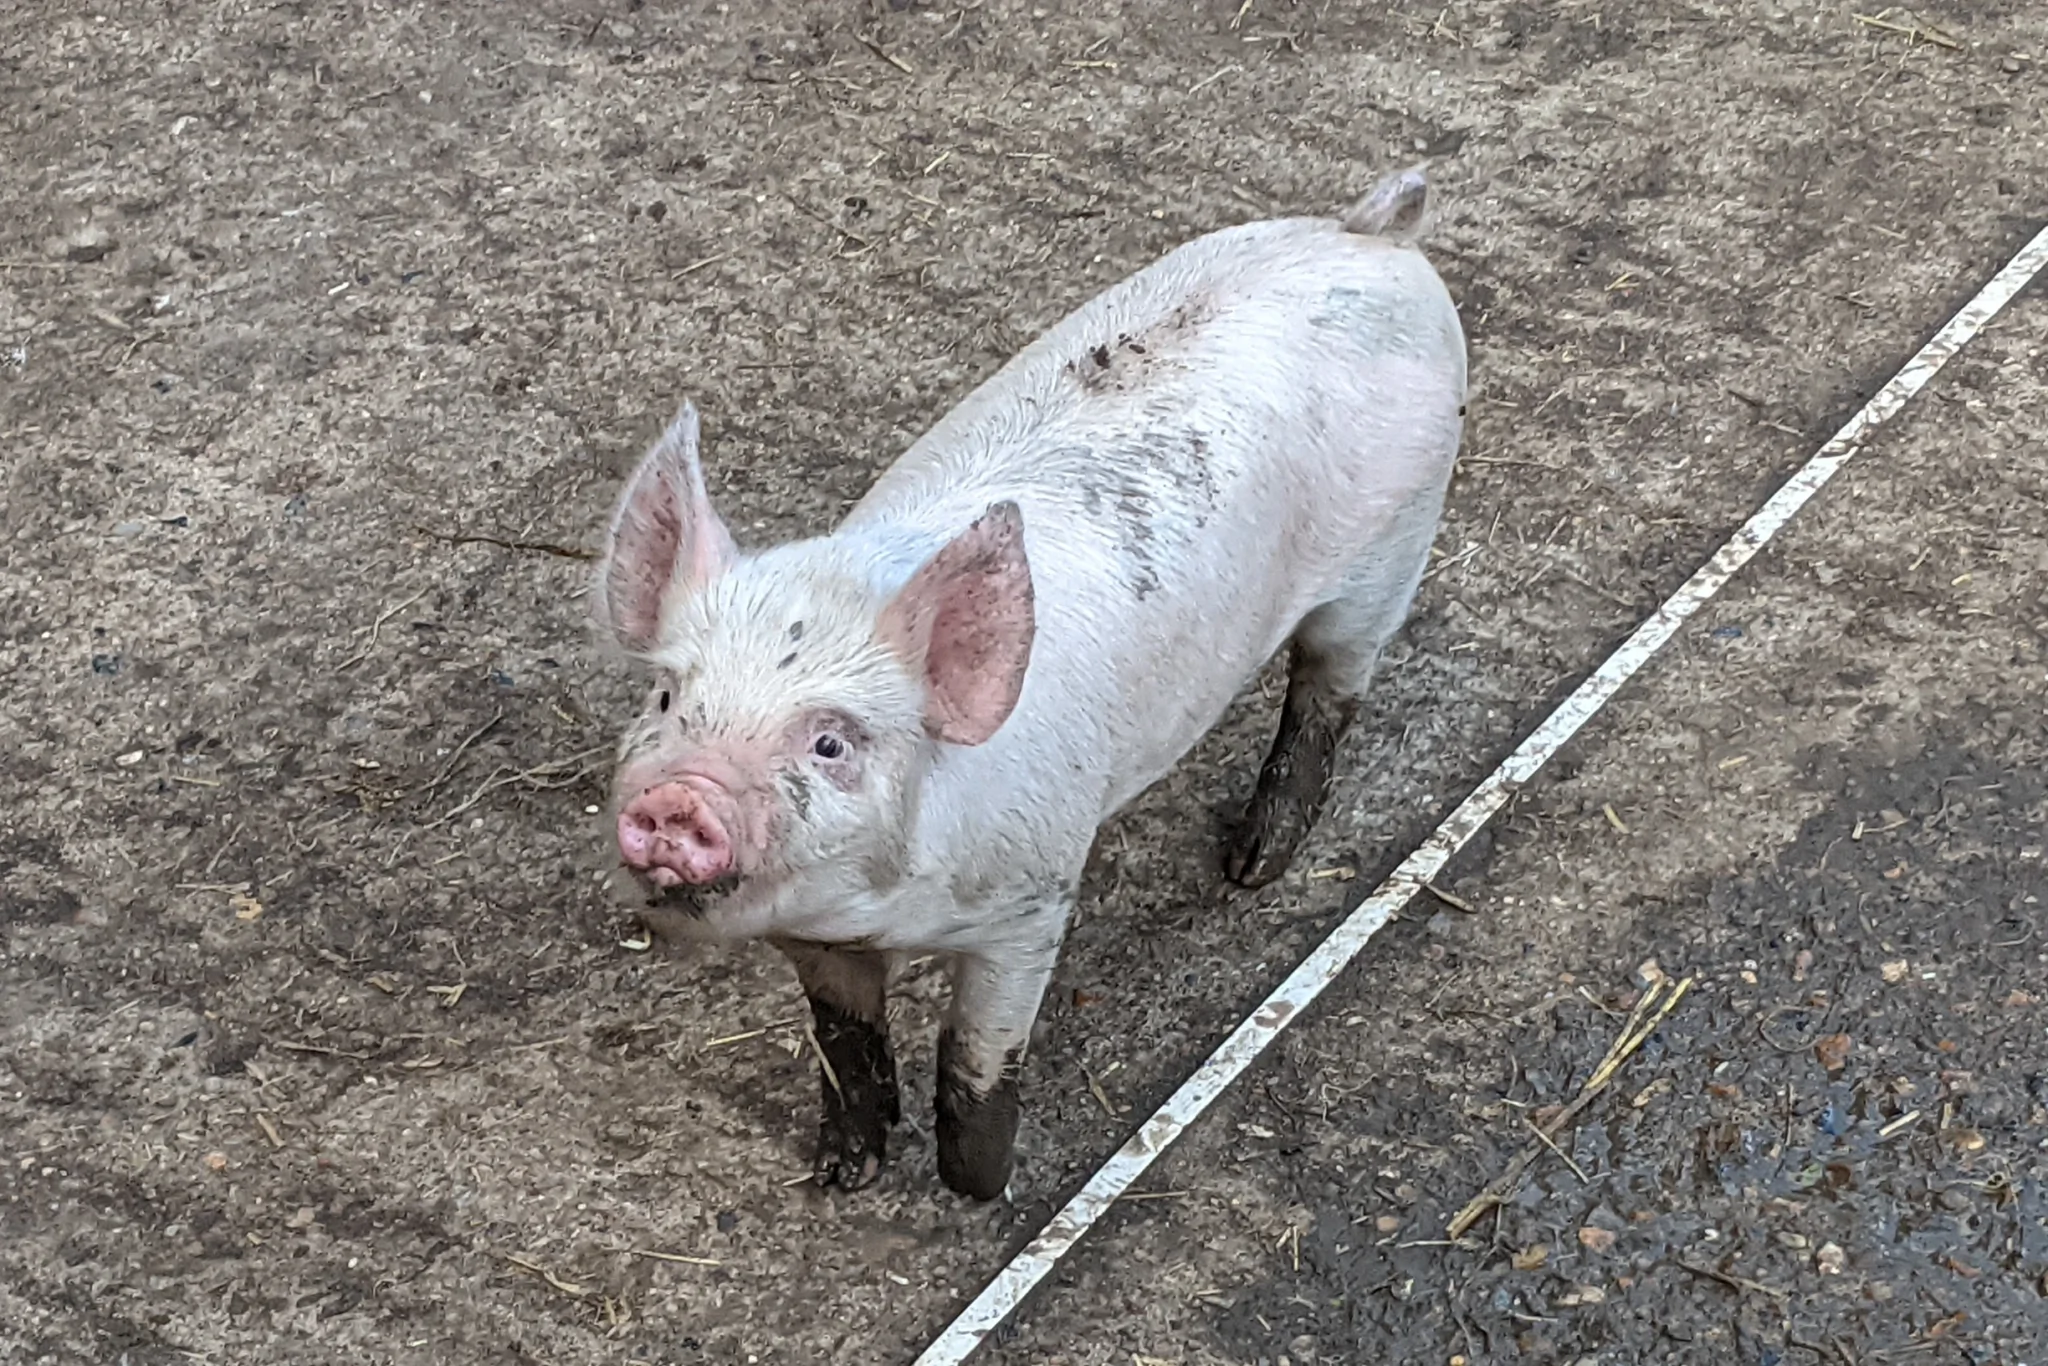 A piglet with muddy legs looking up at the camera